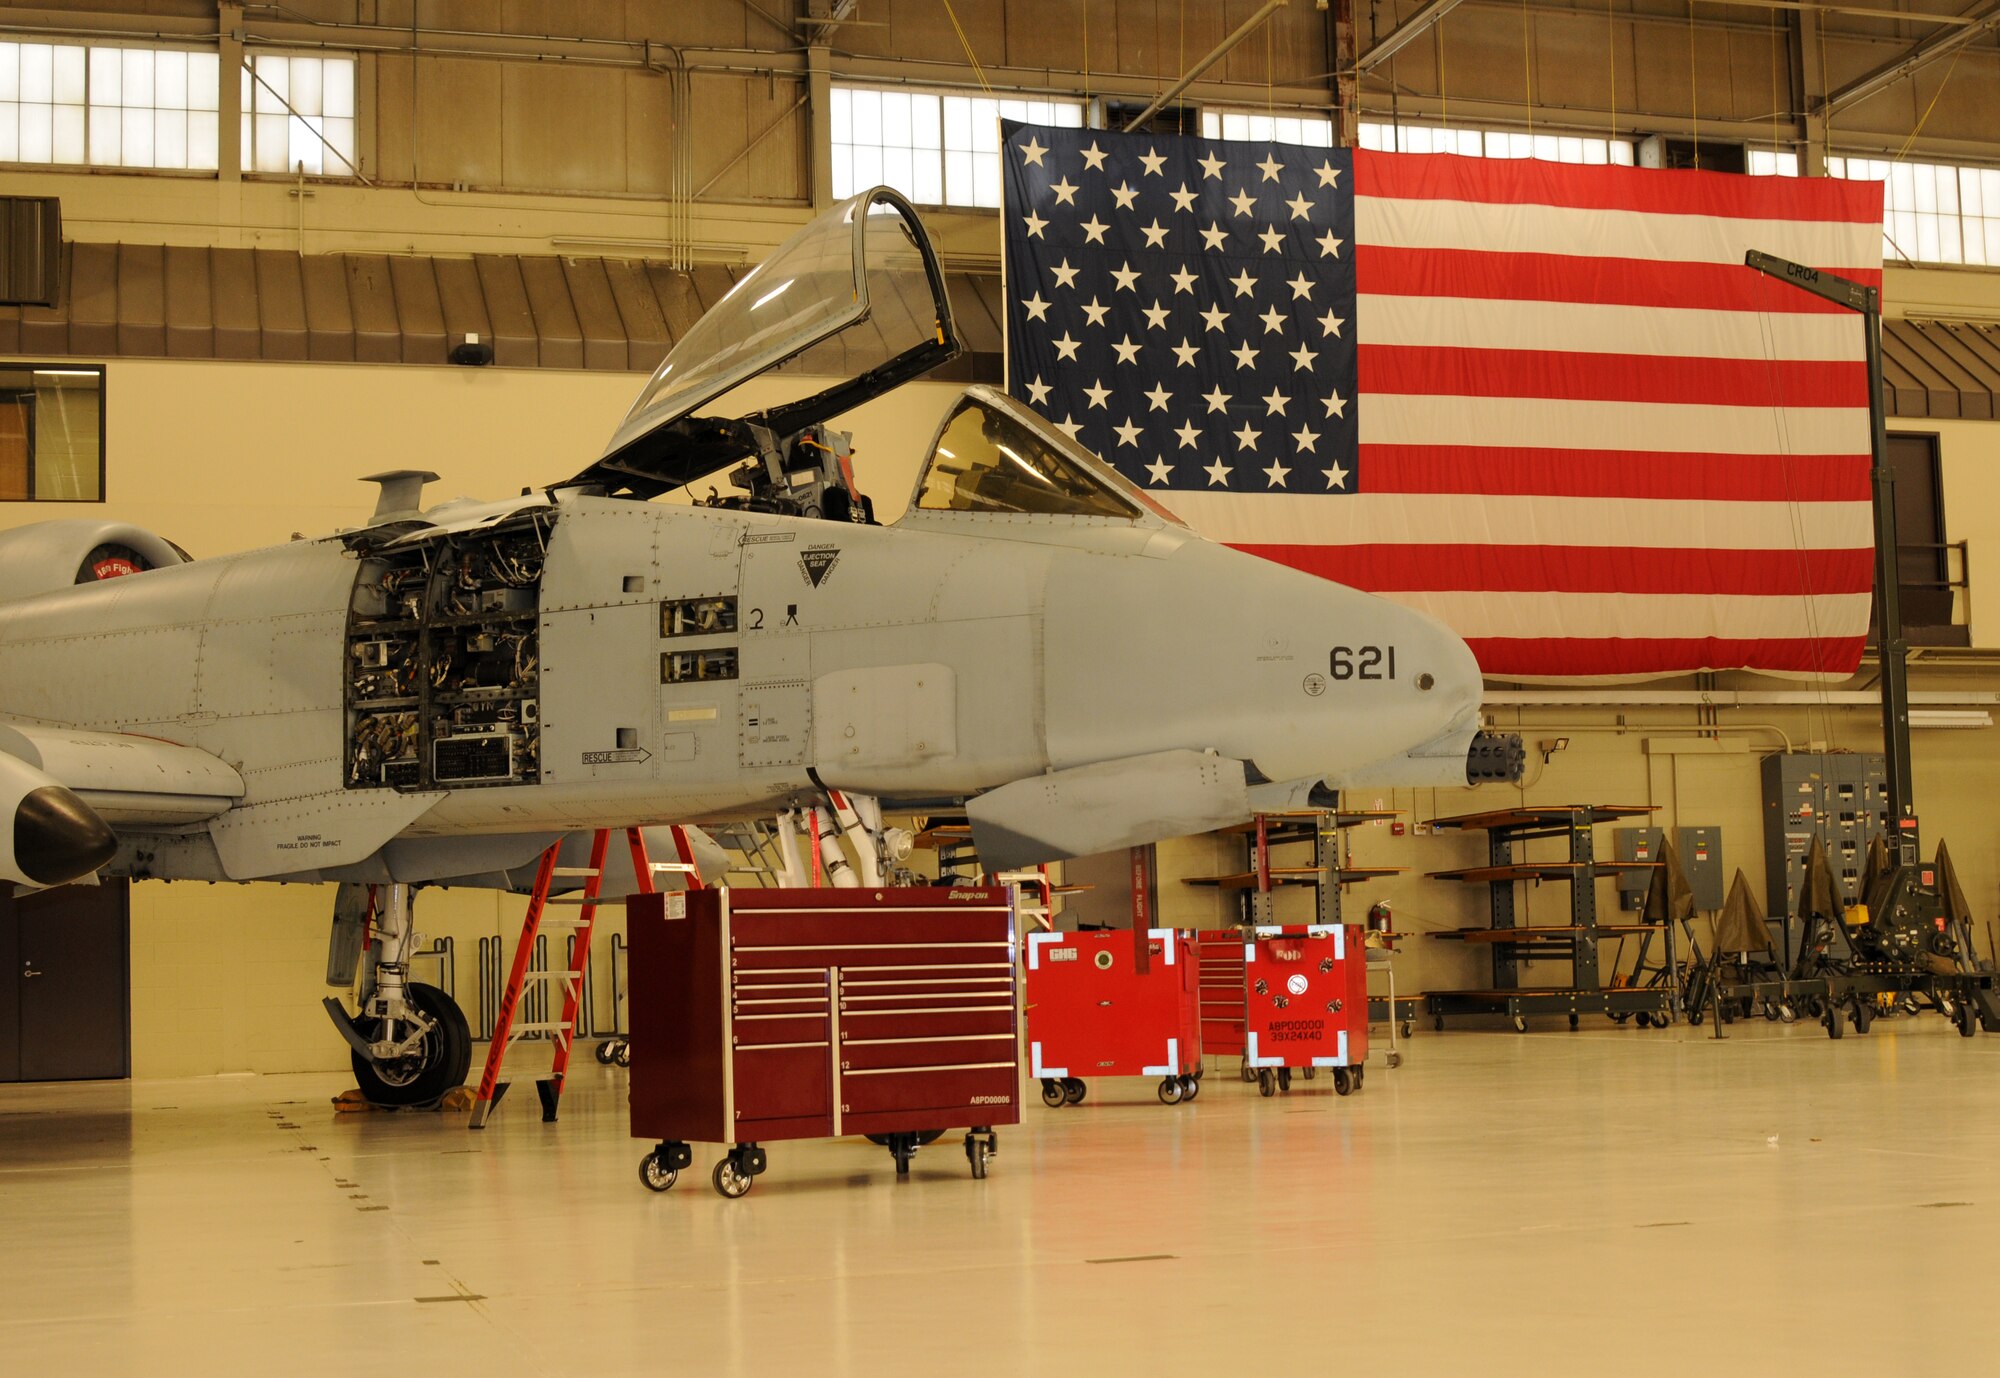 An A-10C Thunderbolt II "Warthog" (aircraft Tail No. 621) is parked inside the main hangar at Ebbing Air National Guard Base, Fort Smith, Arkansas. It was the second to last aircraft to receive a phase inspection at the 188th. After 60 years of a manned flying mission, the 188th Wing is currently converting to a remote piloted aircraft and intelligence, surveillance and reconnaissance mission. (U.S. Air National Guard photo by Tech. Sgt. Josh Lewis/released)